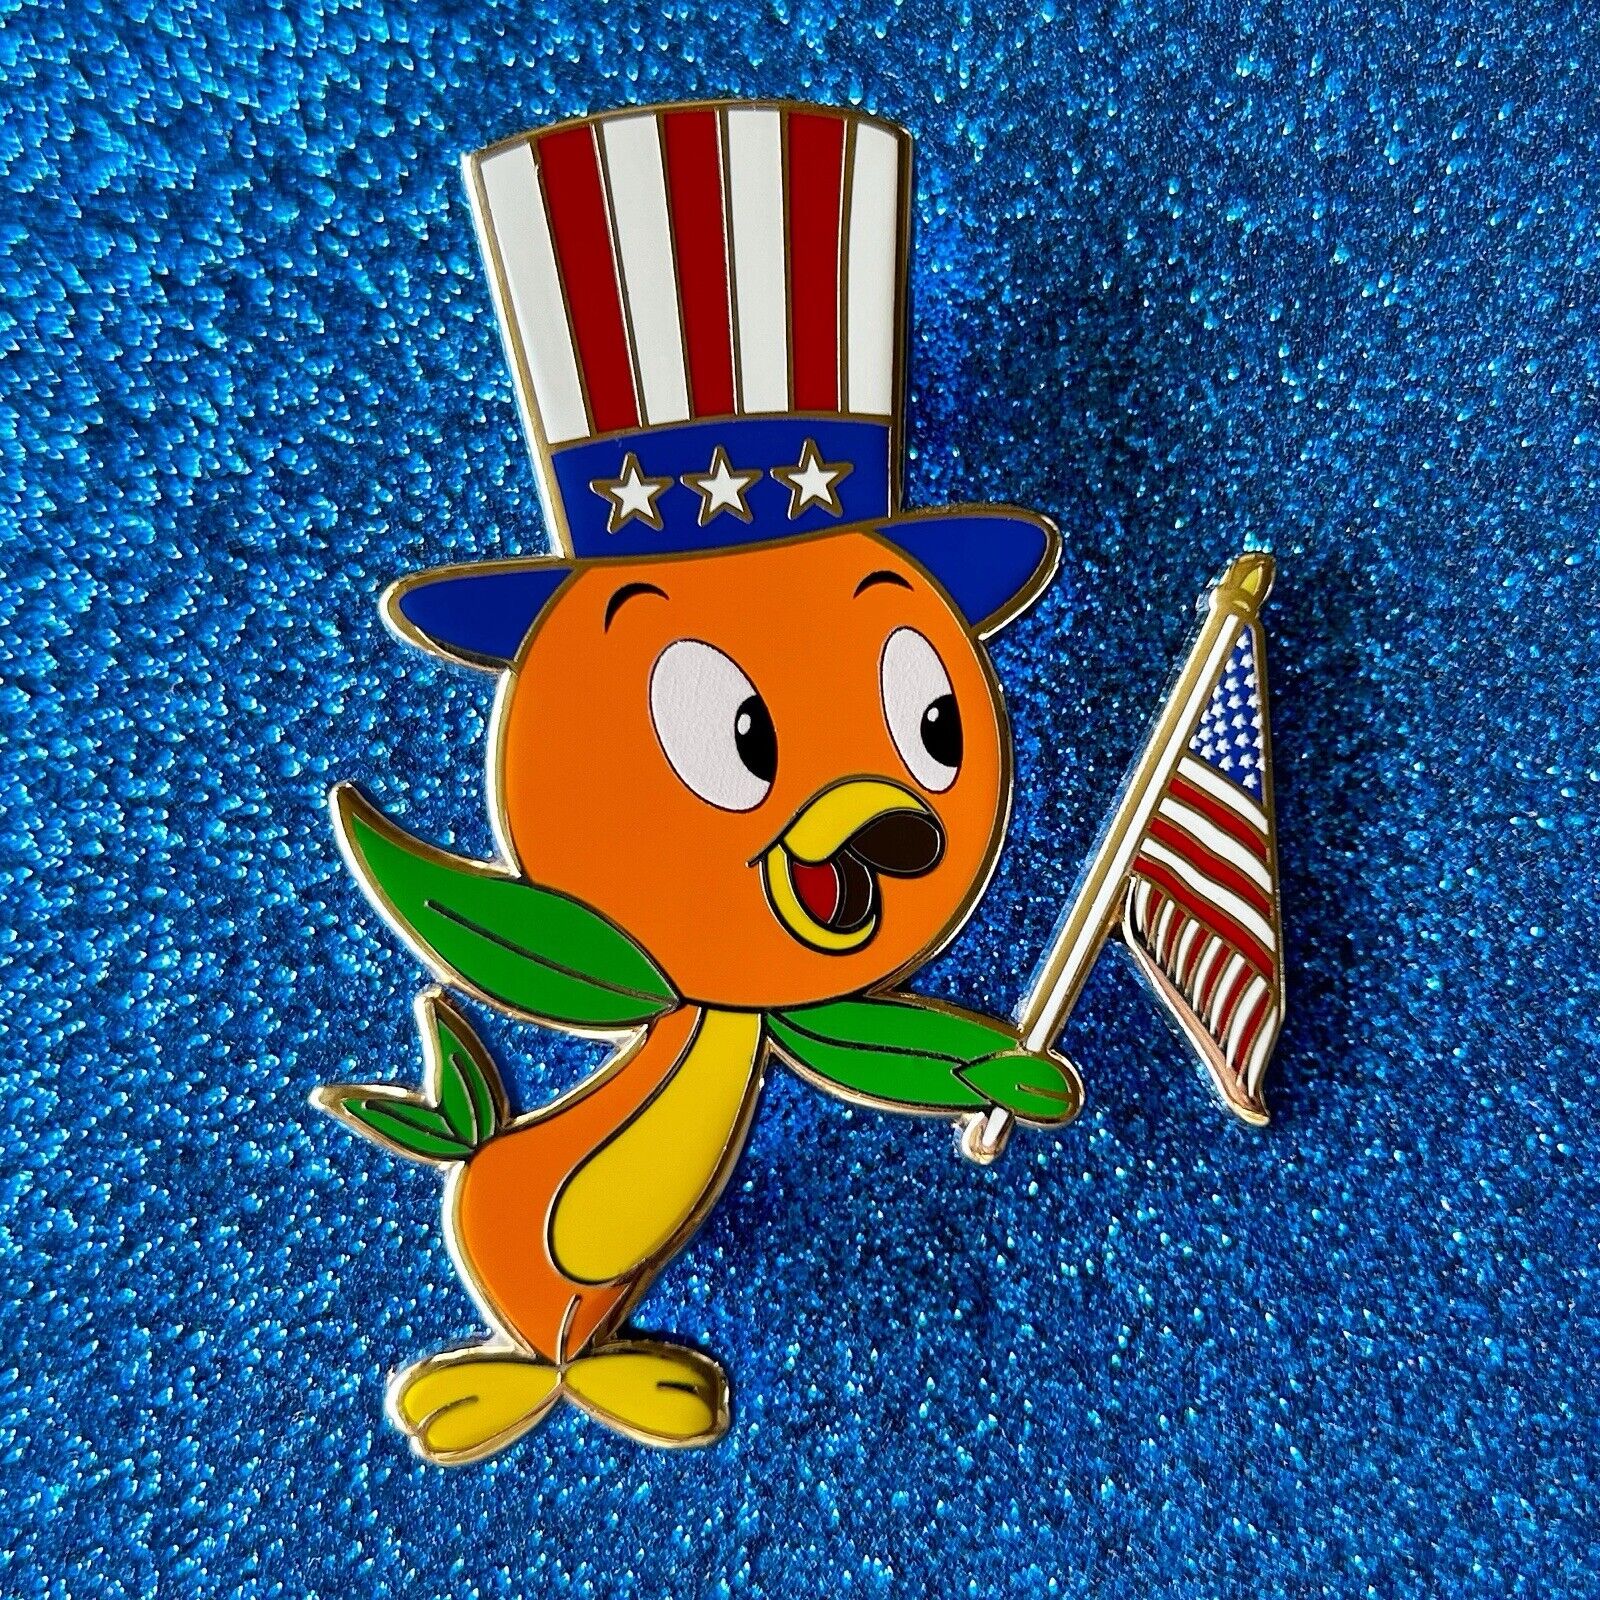 Orange Bird 4th Of July Holidays Series LE 35 Fantasy Pin Fourth Of July